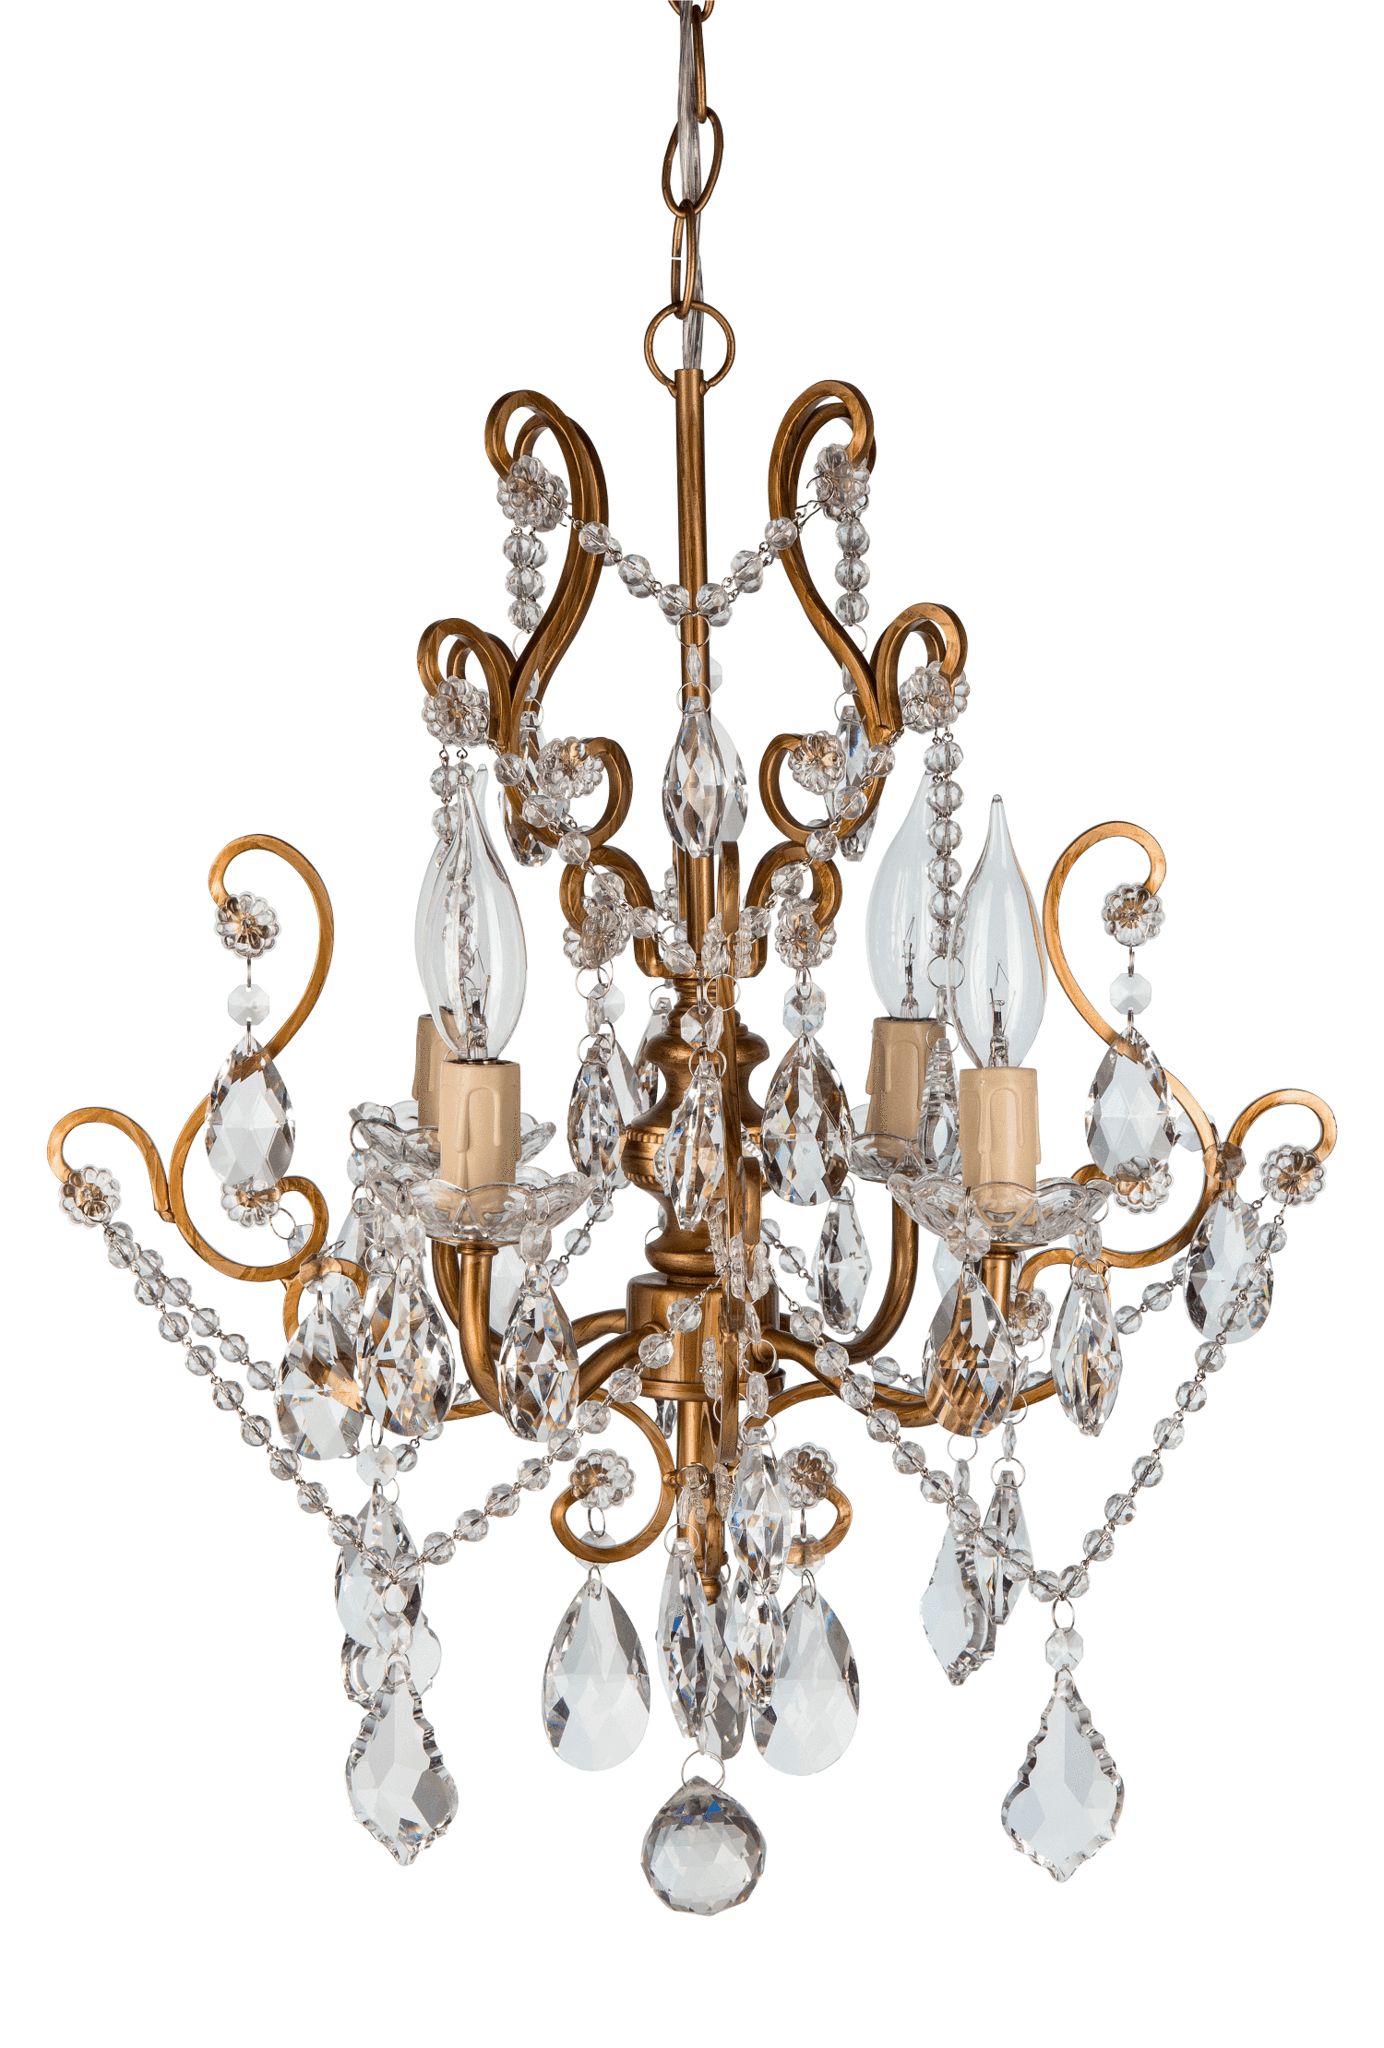 4 Light Vintage Crystal Plug In Chandelier (gold) | Amalfi Regarding Blanchette 5 Light Candle Style Chandeliers (View 16 of 30)